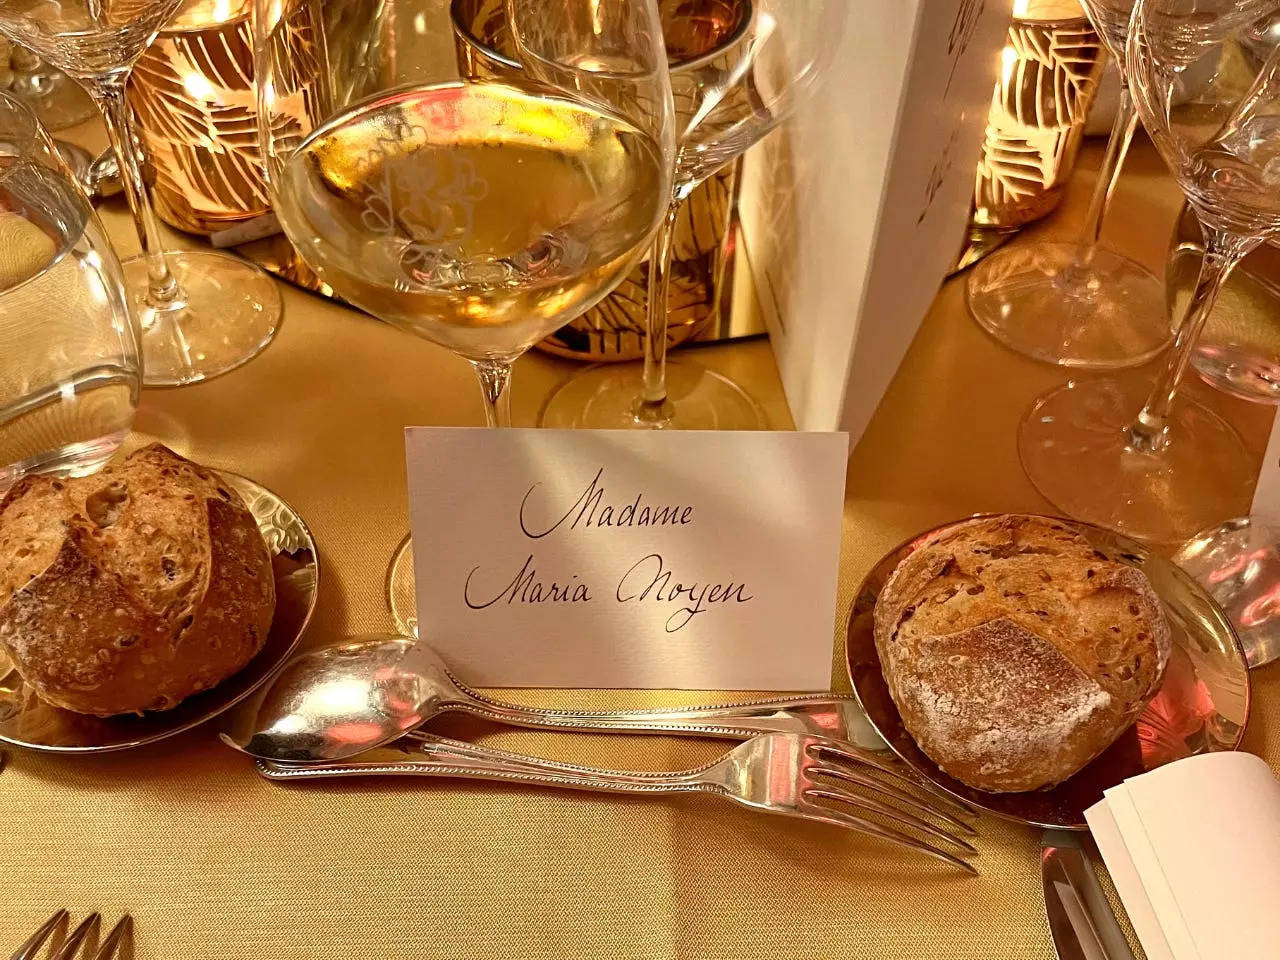 A handwritten place card designated the seating arrangements.